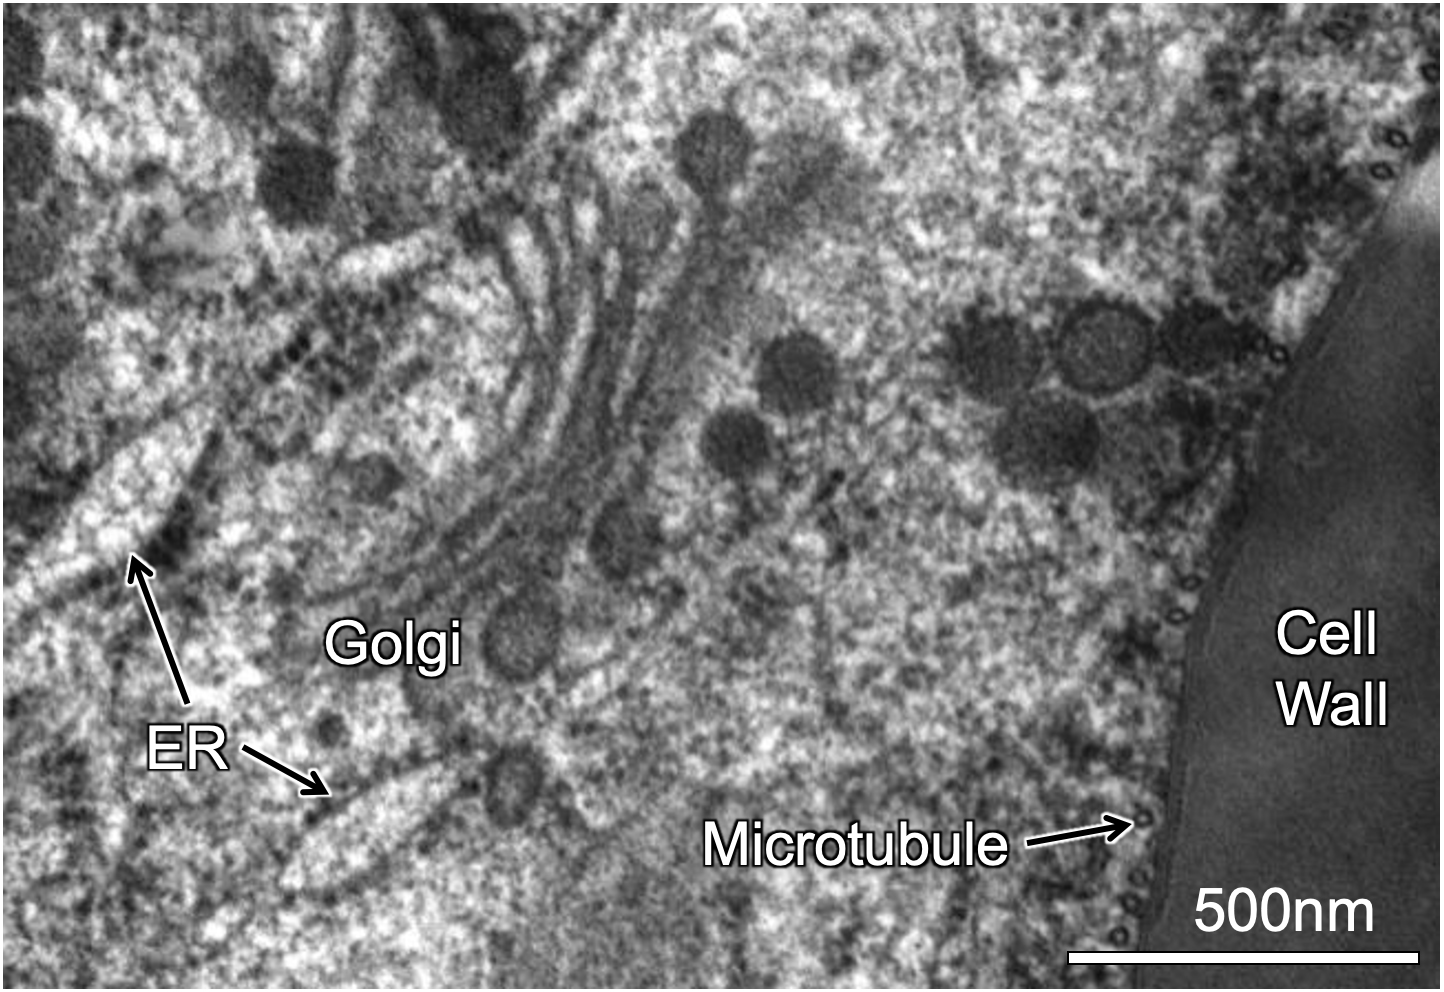 TEM electron micrograph with labelled ER, Golgi, microtubules and cell wall